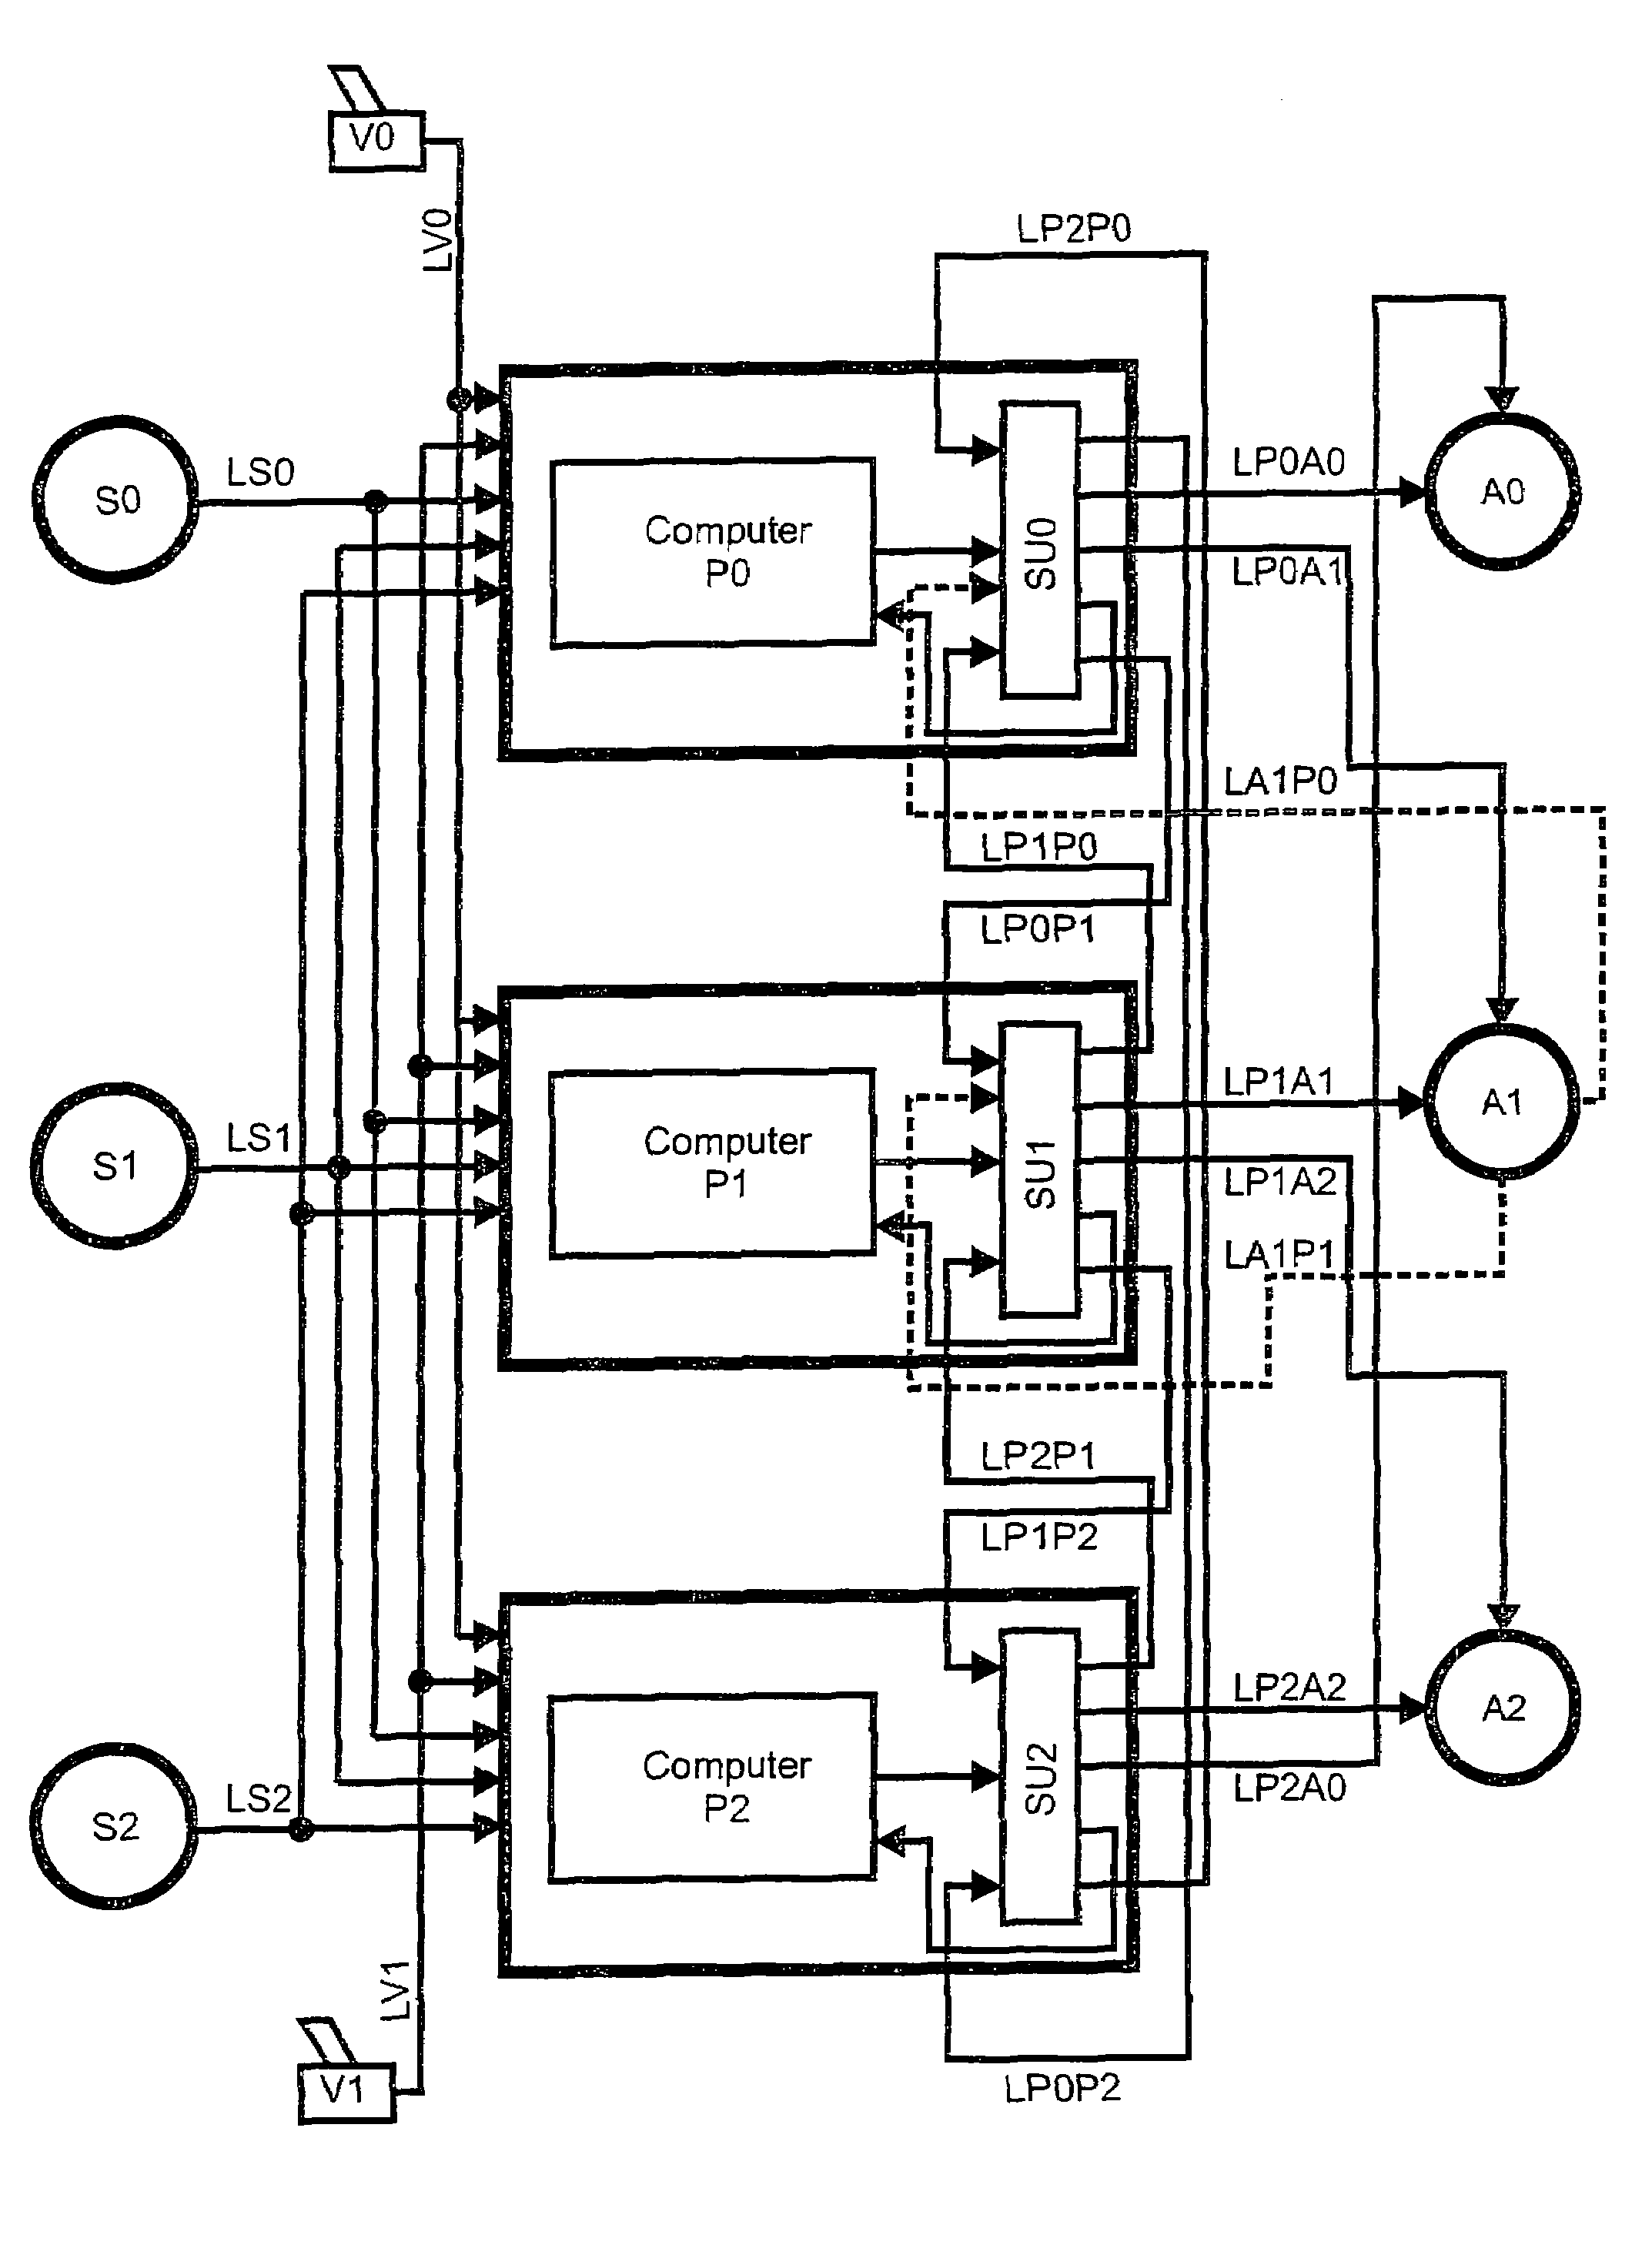 Fault tolerant computer controlled system